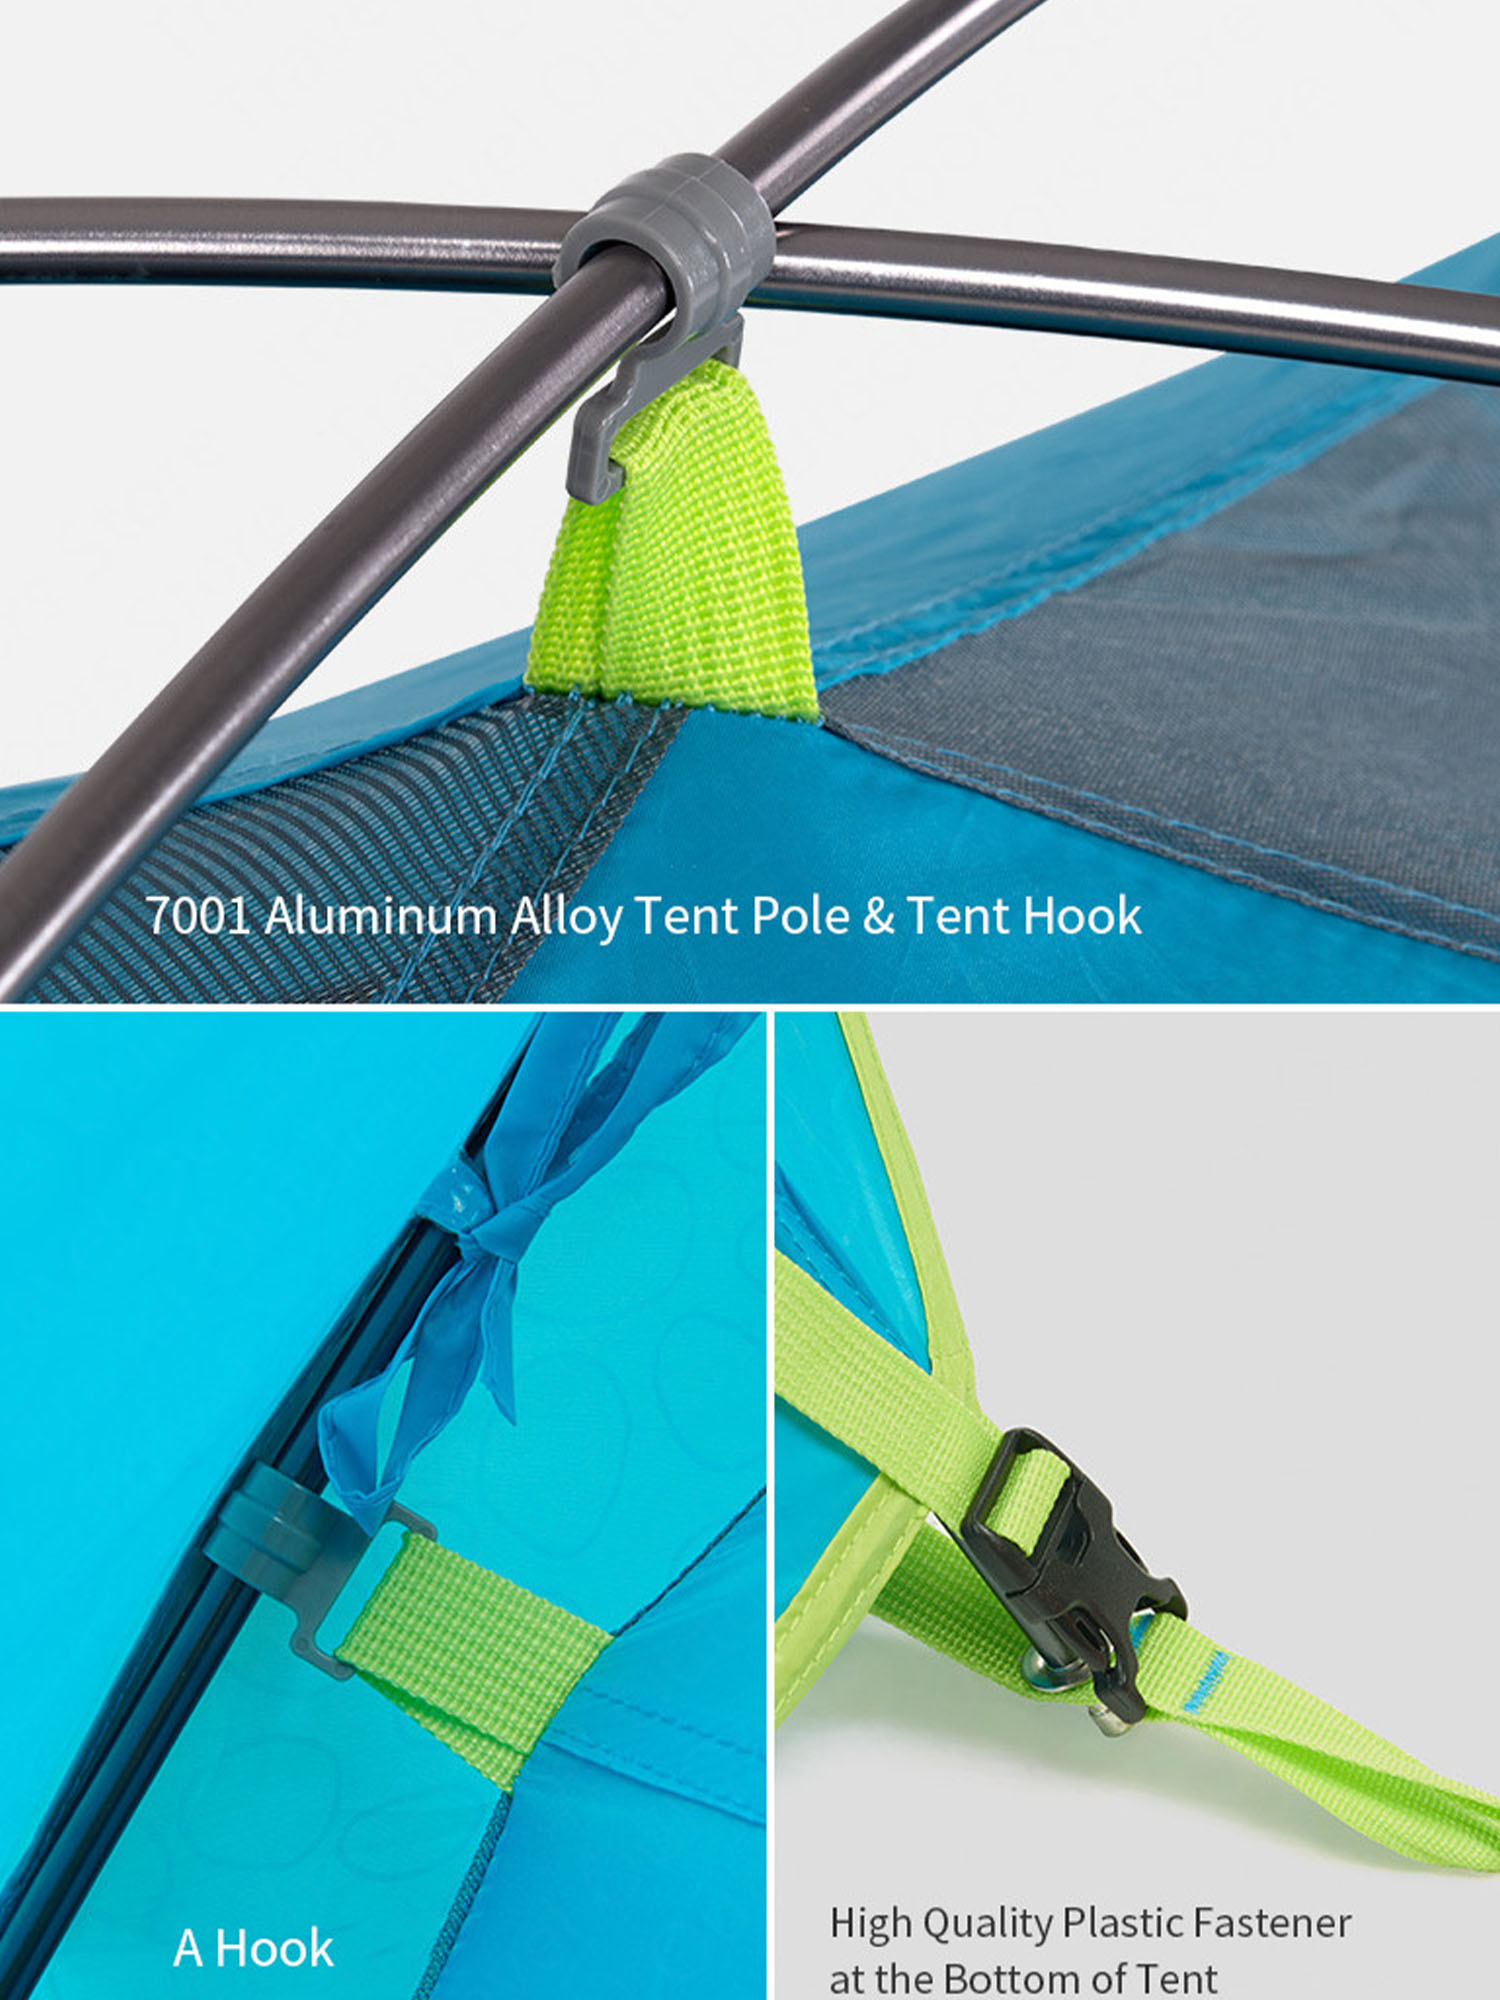 Палатка Naturehike P-Series Aluminum Pole Tent With New Material 210T65D Embossed Design 3 man Sea Blue